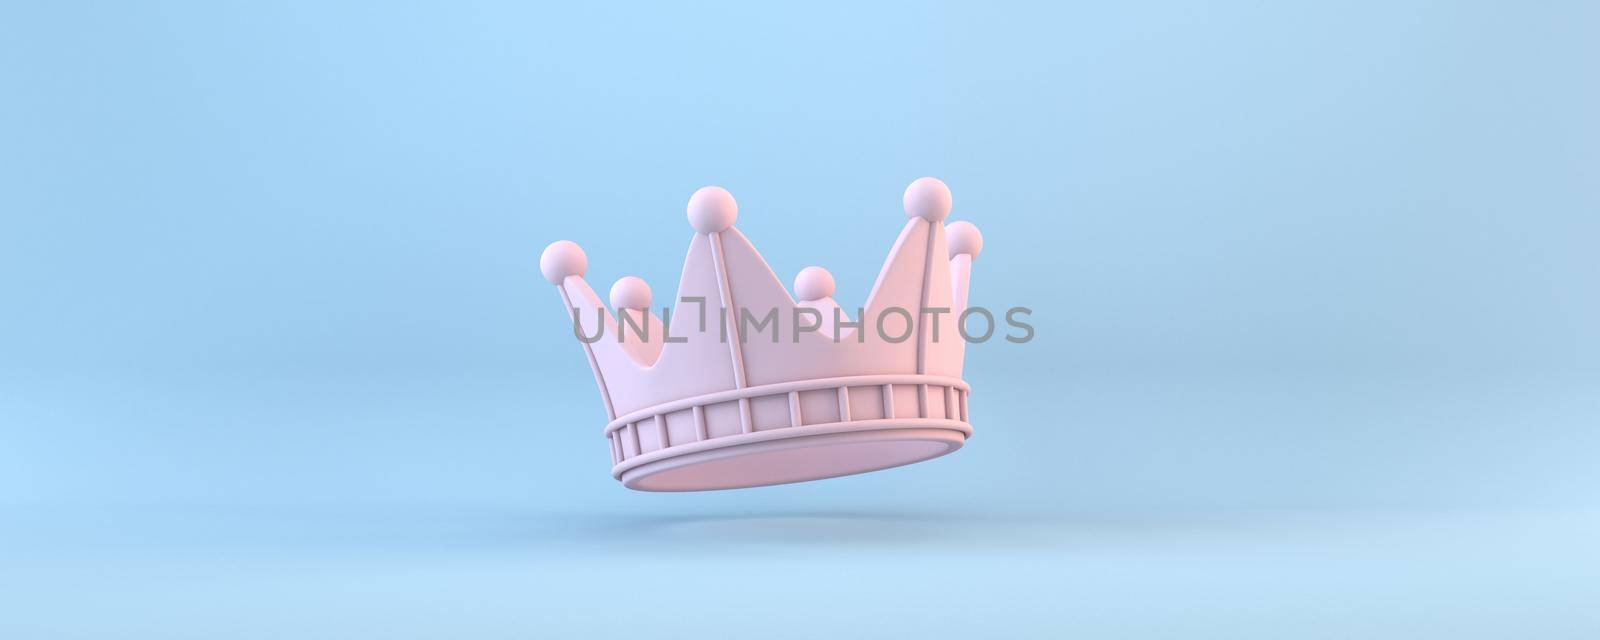 Pink crown 3D rendering illustration isolated on blue background